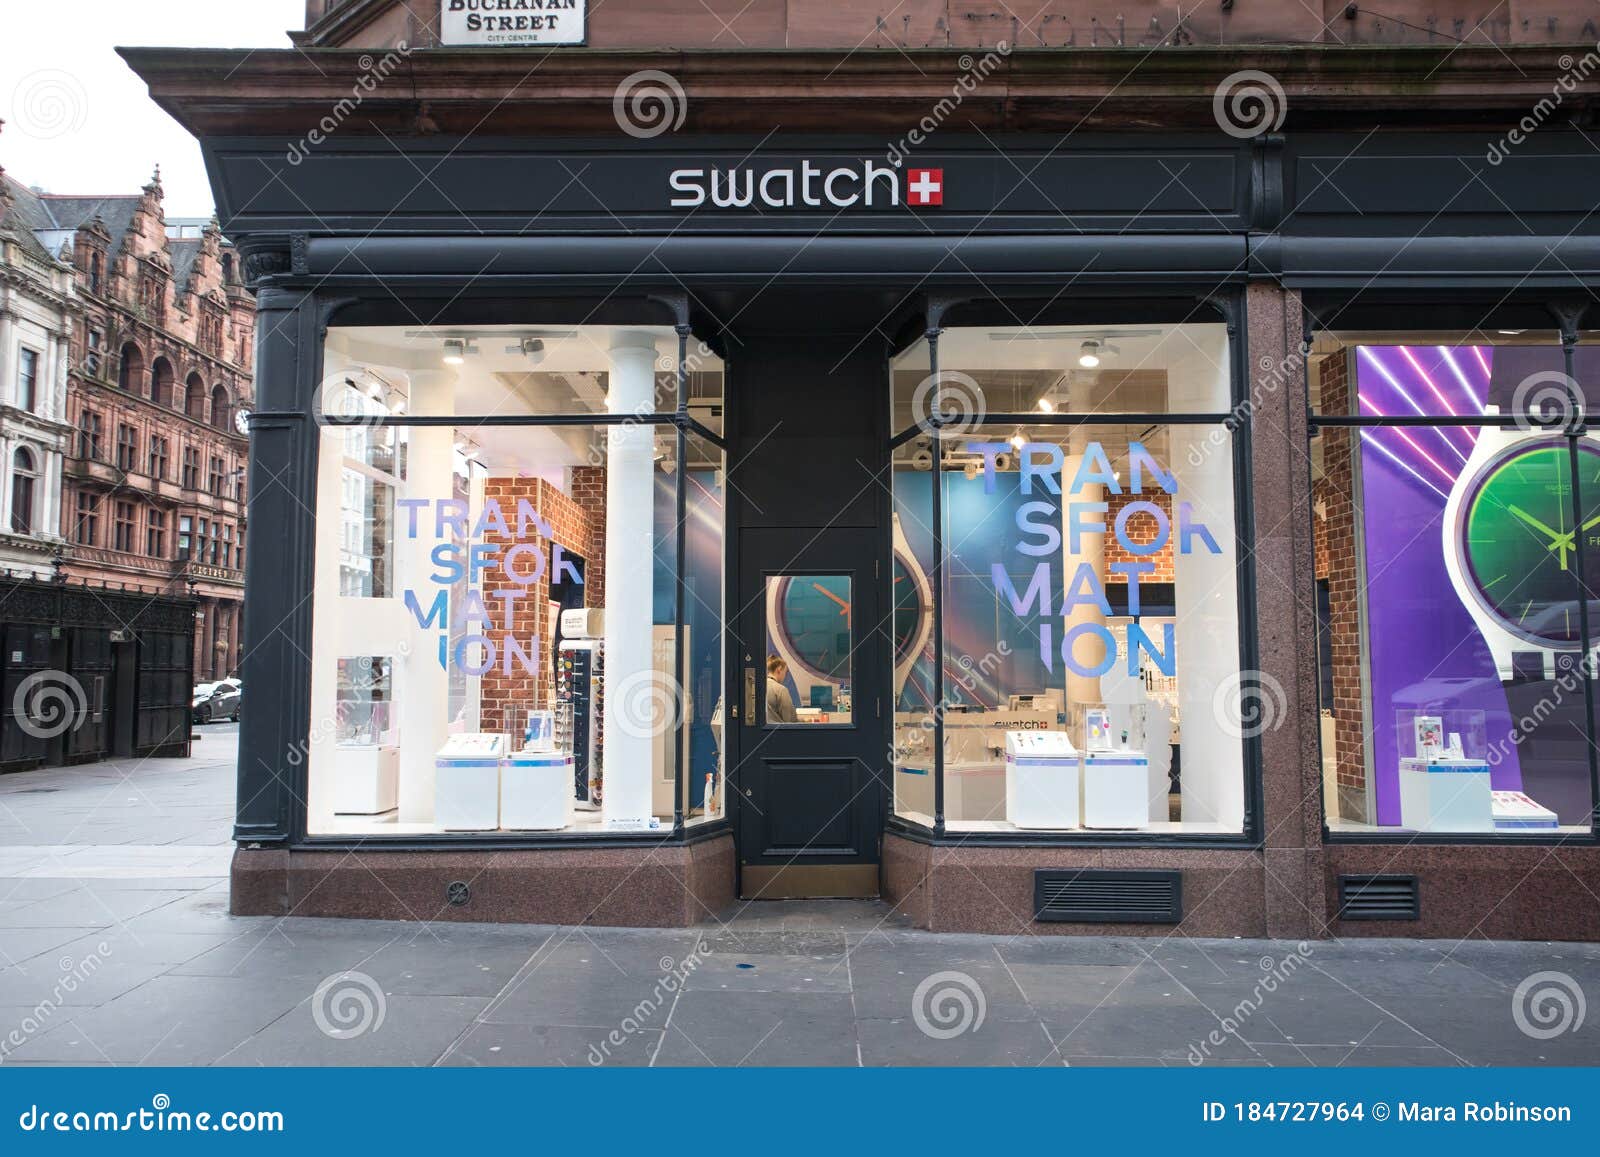 Glasgow / Great Britain : Exterior of Swatch Watch store showing window display, logo, branding and signage